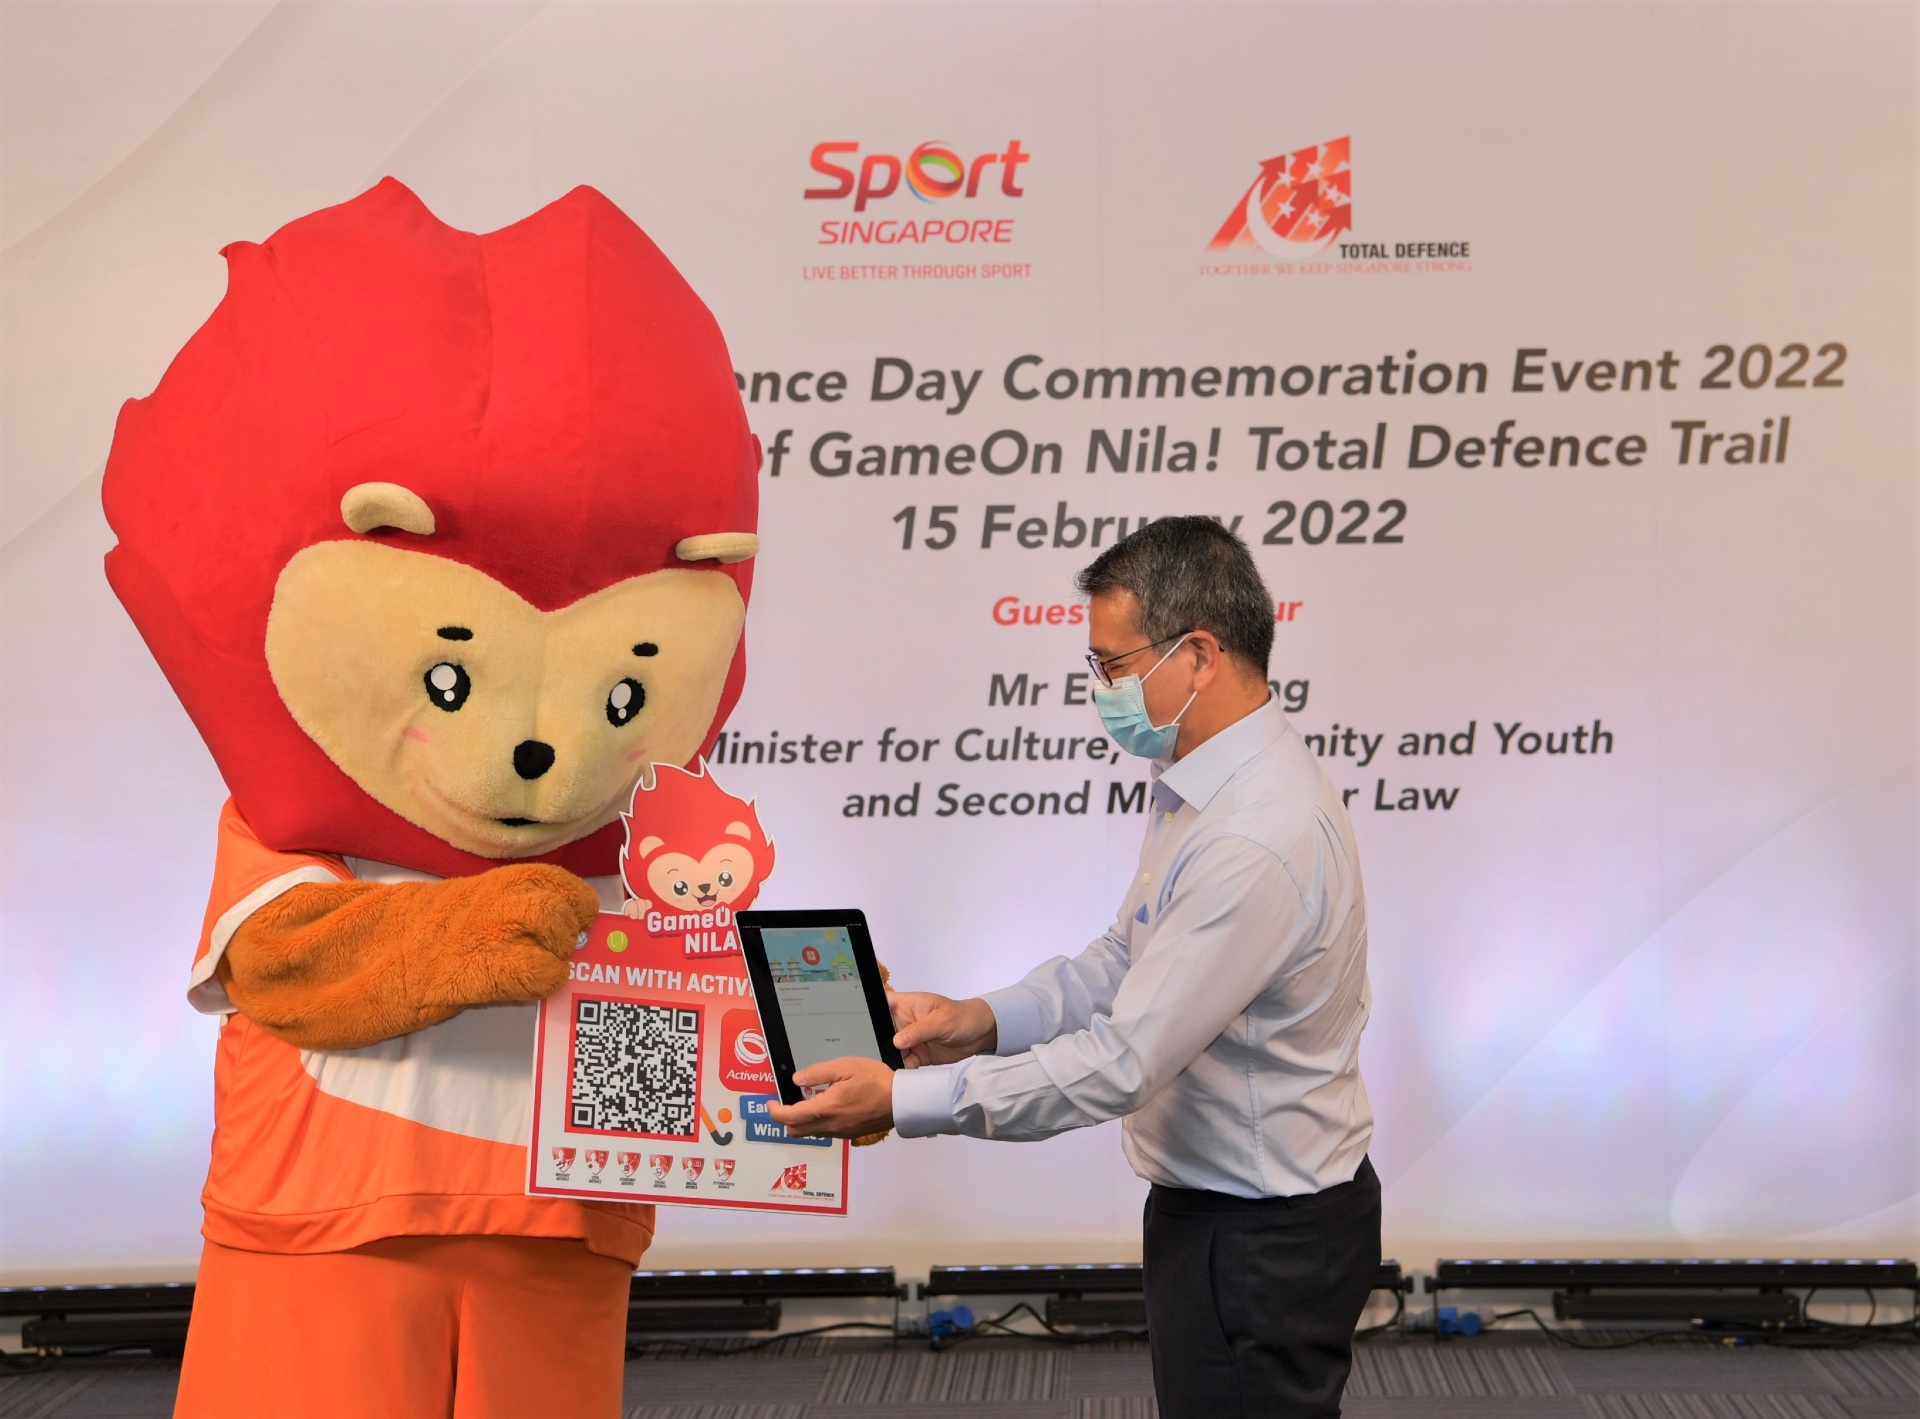 Mr Tong launched the Total Defence Trail as part of the GameOn Nila! Campaign, jointly organised by MINDEF, Nexus and Sport Singapore.